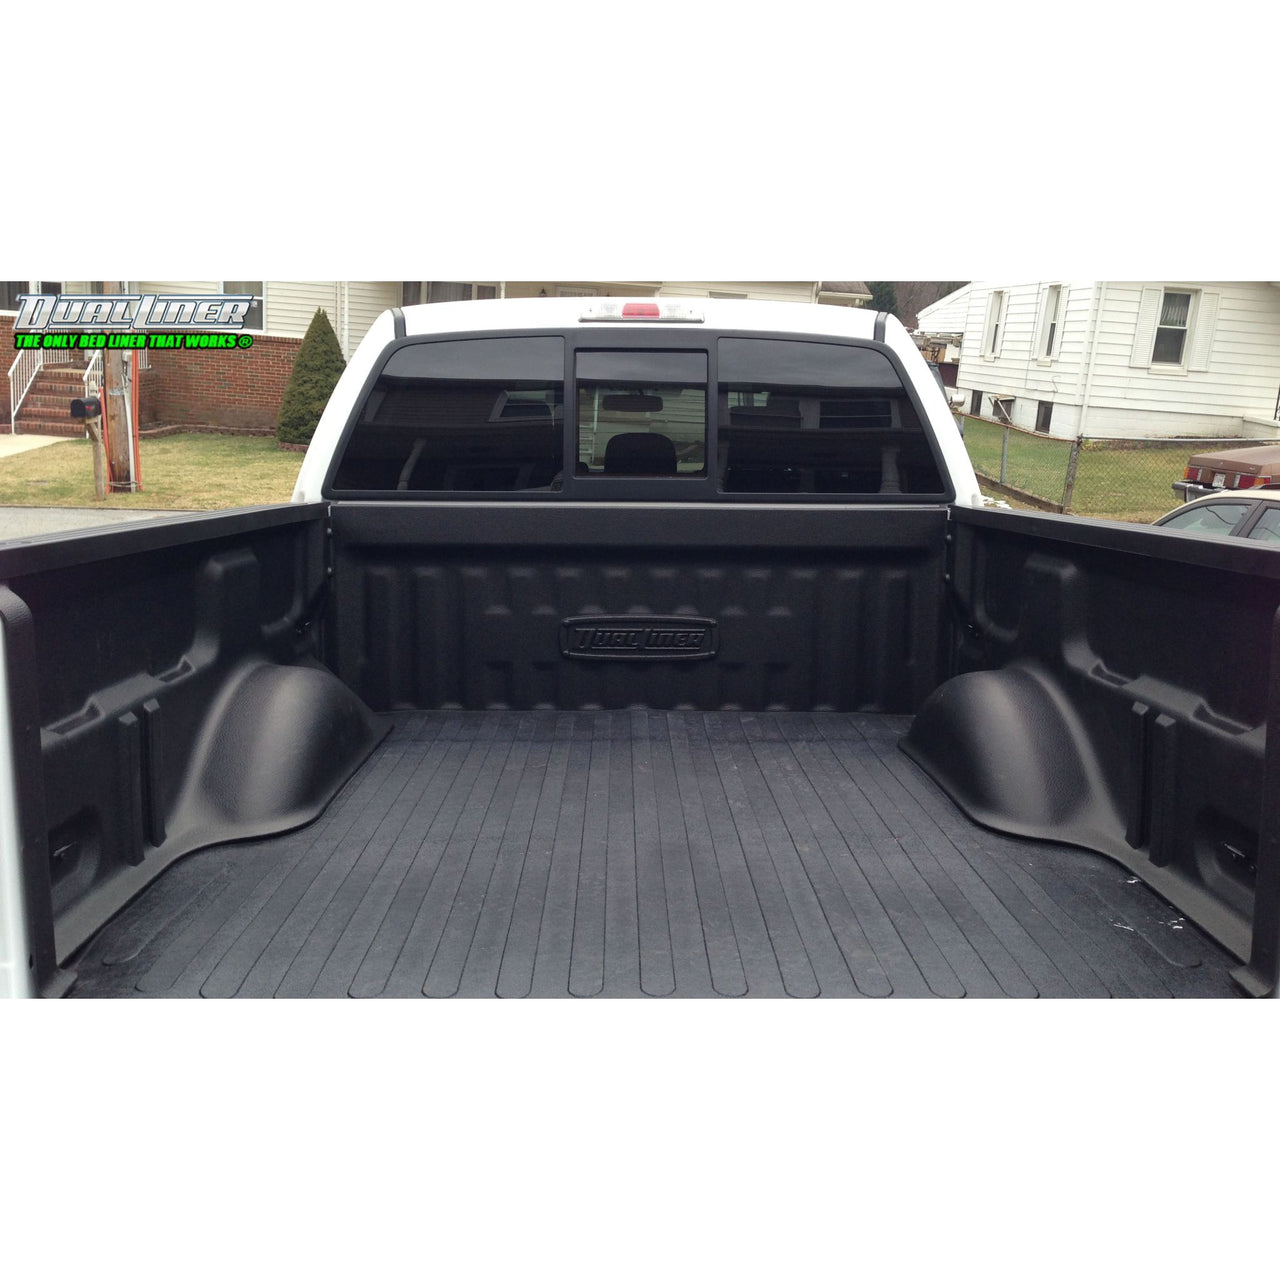 DualLiner 2021 to 2022 F-150 (WITH LED Light Bar & Tailgate Work Surface) - Regular 6.5' Bed